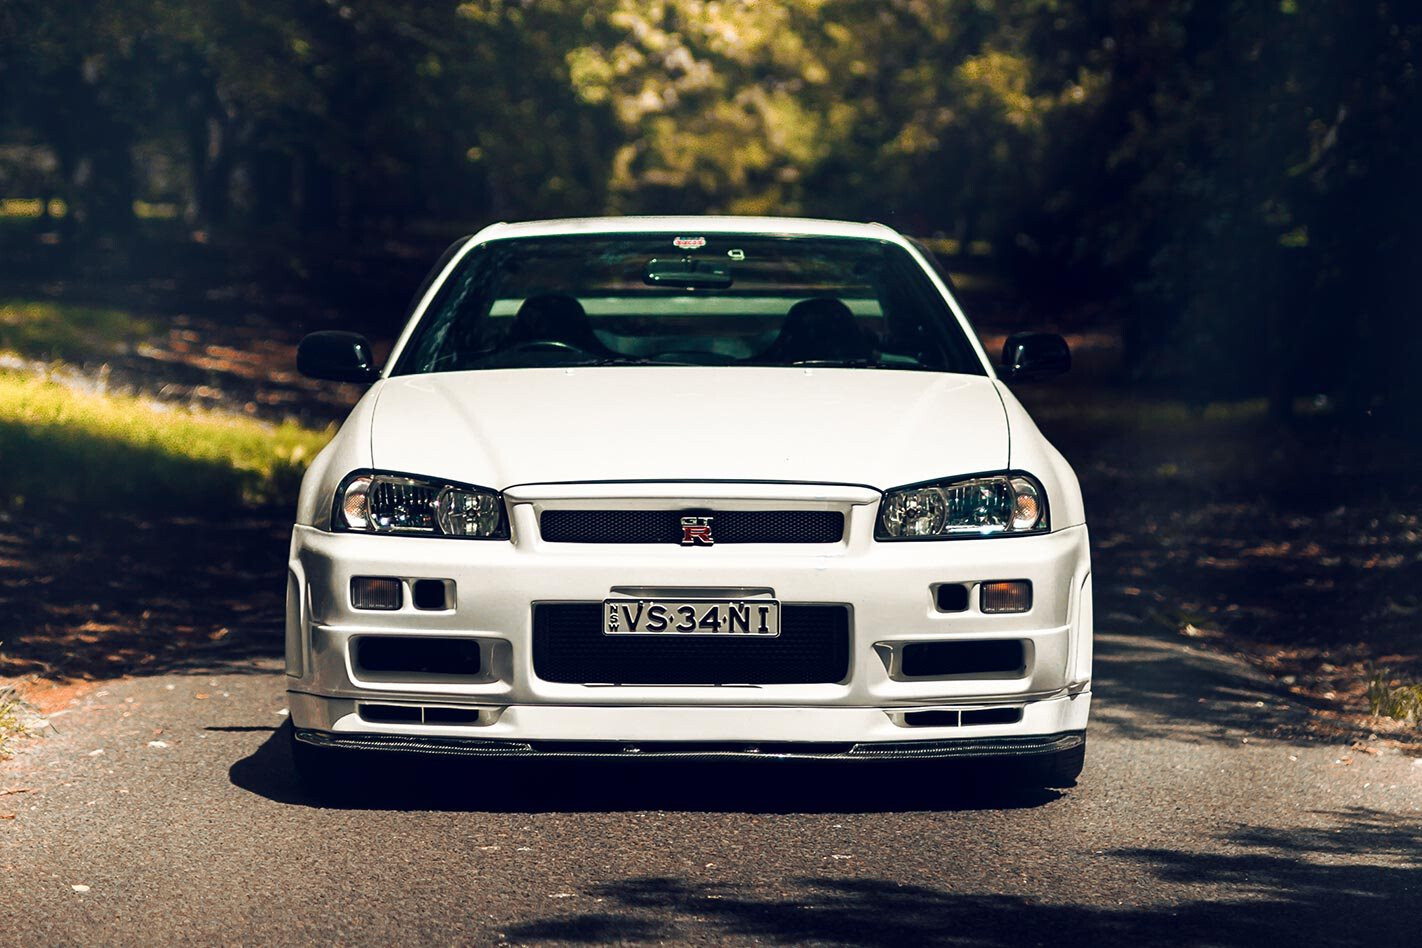 Nissan Almost Fitted A V6 To The Skyline R34 Gt R Instead Of The Rb26